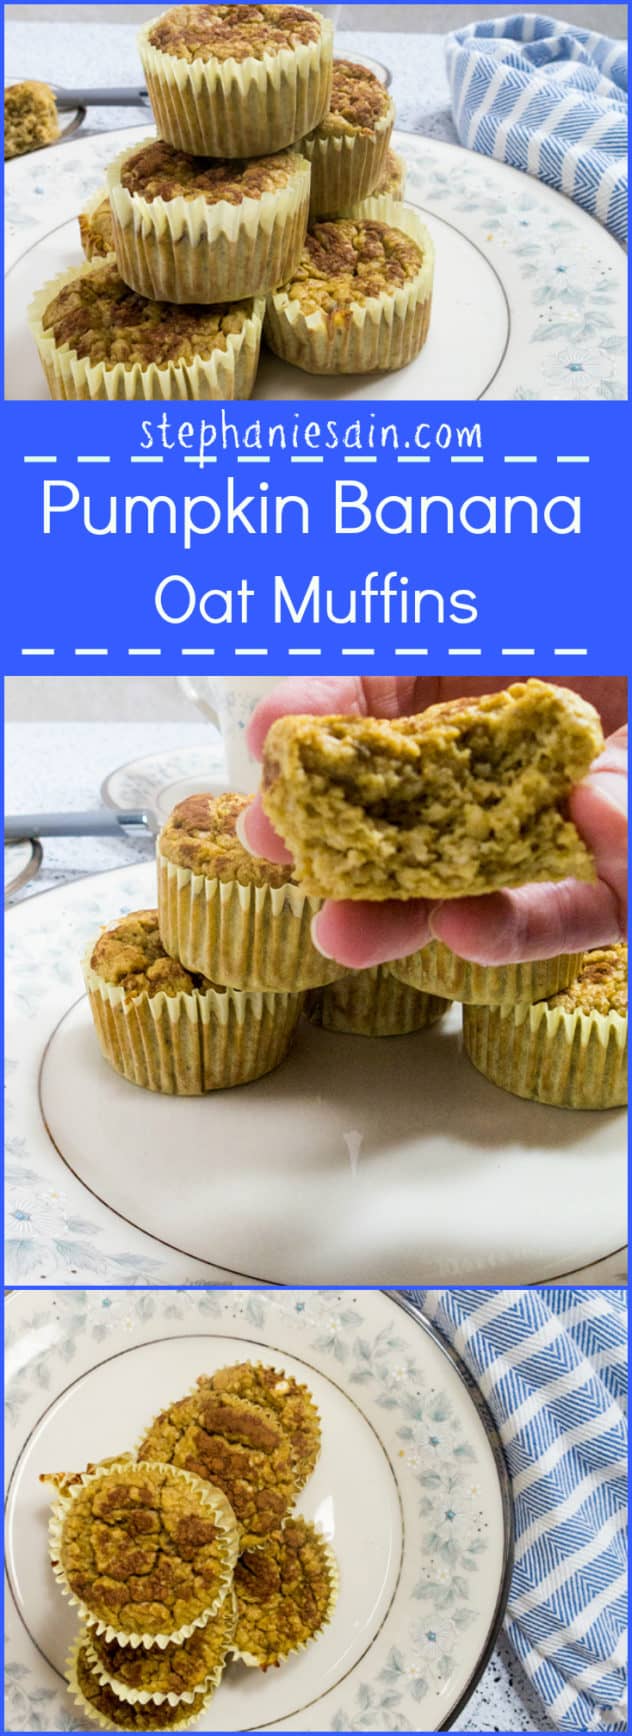 Pumpkin Banana Oat Muffins are the perfect, tasty, healthy muffins for breakfast or snack. No refined sugars, Vegetarian and Gluten Free.